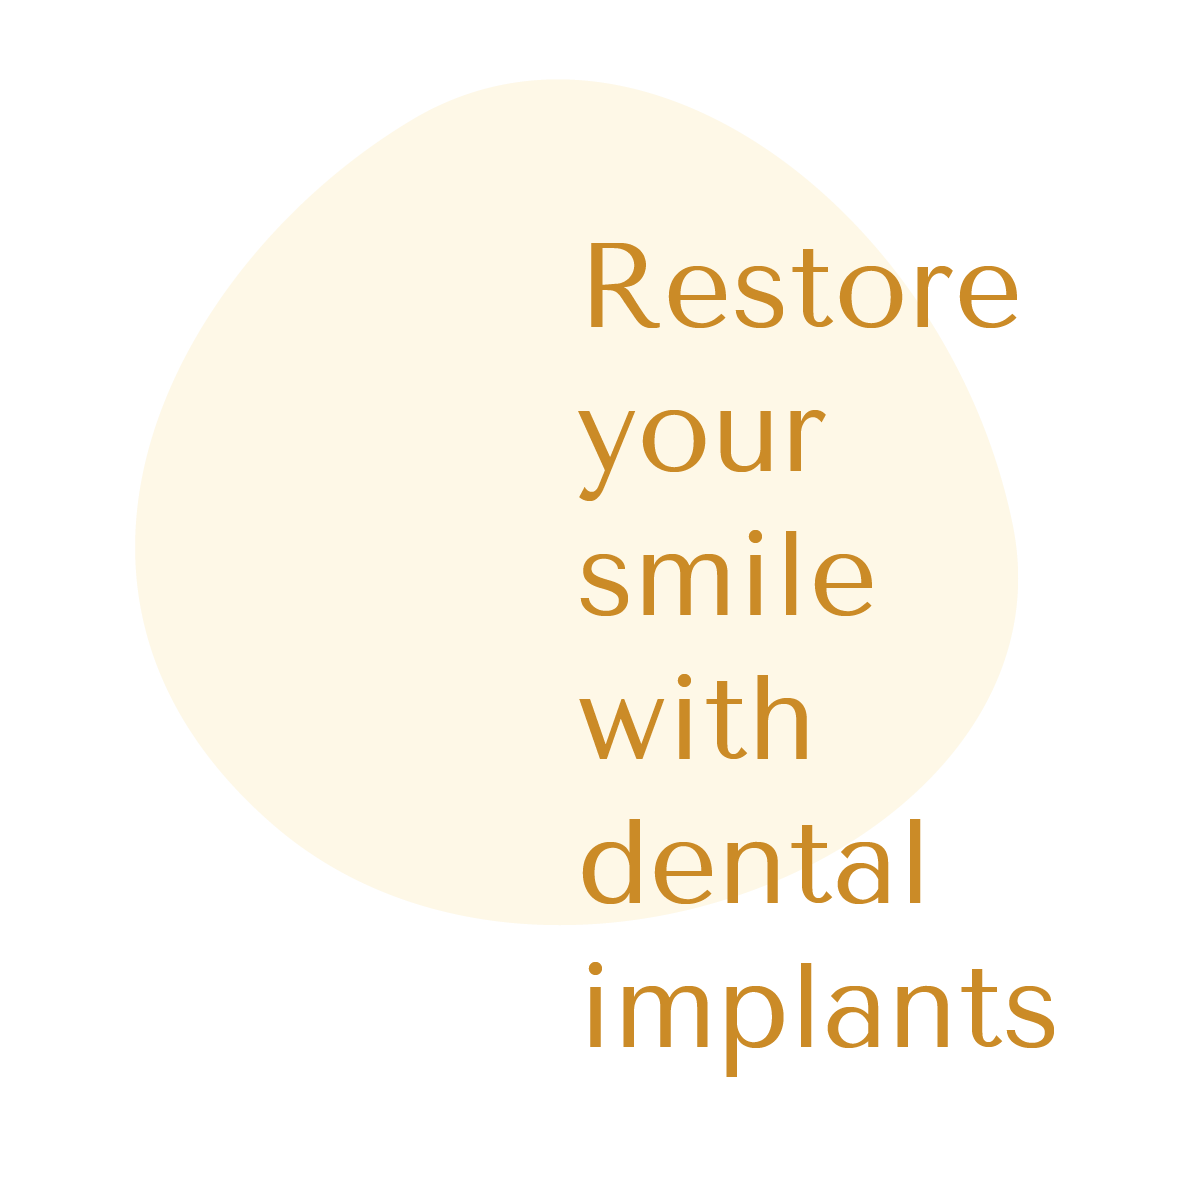 surry hills dental implants quote